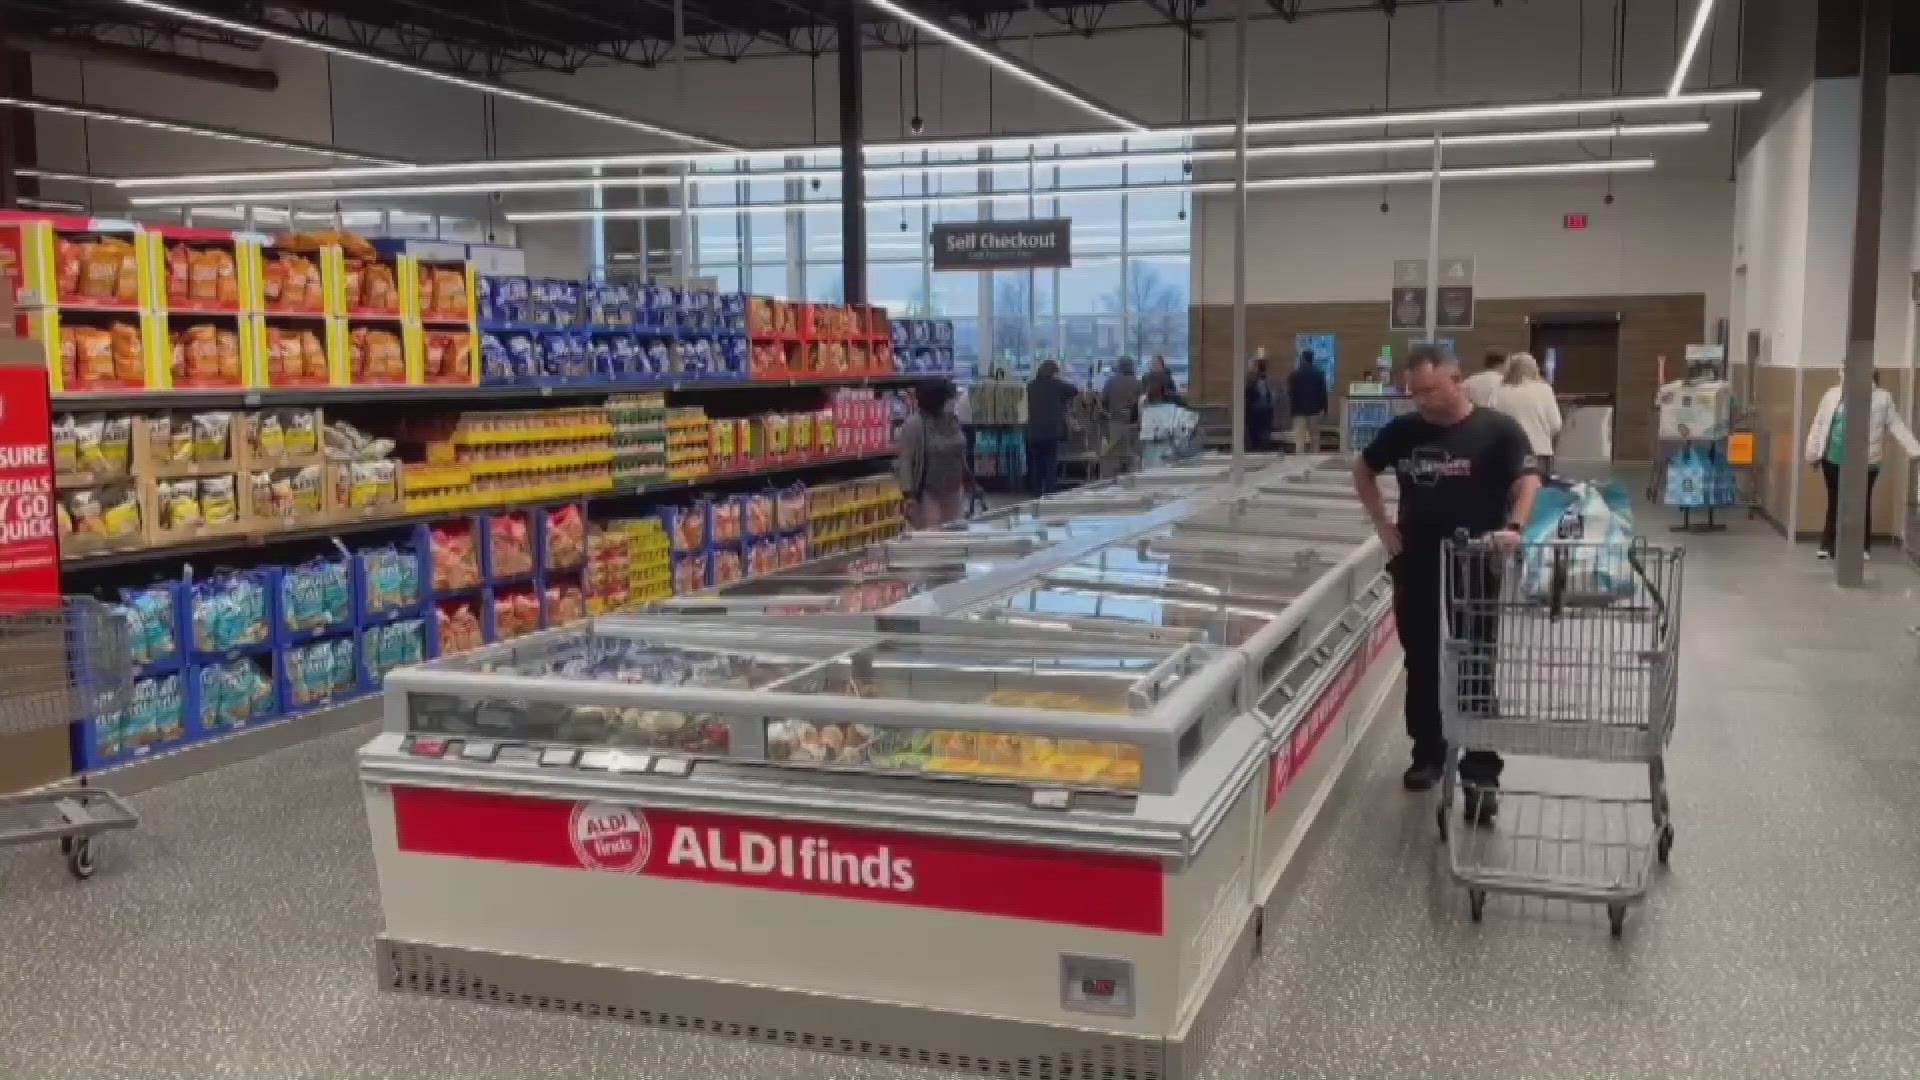 Aldi food market officially opens in Conway